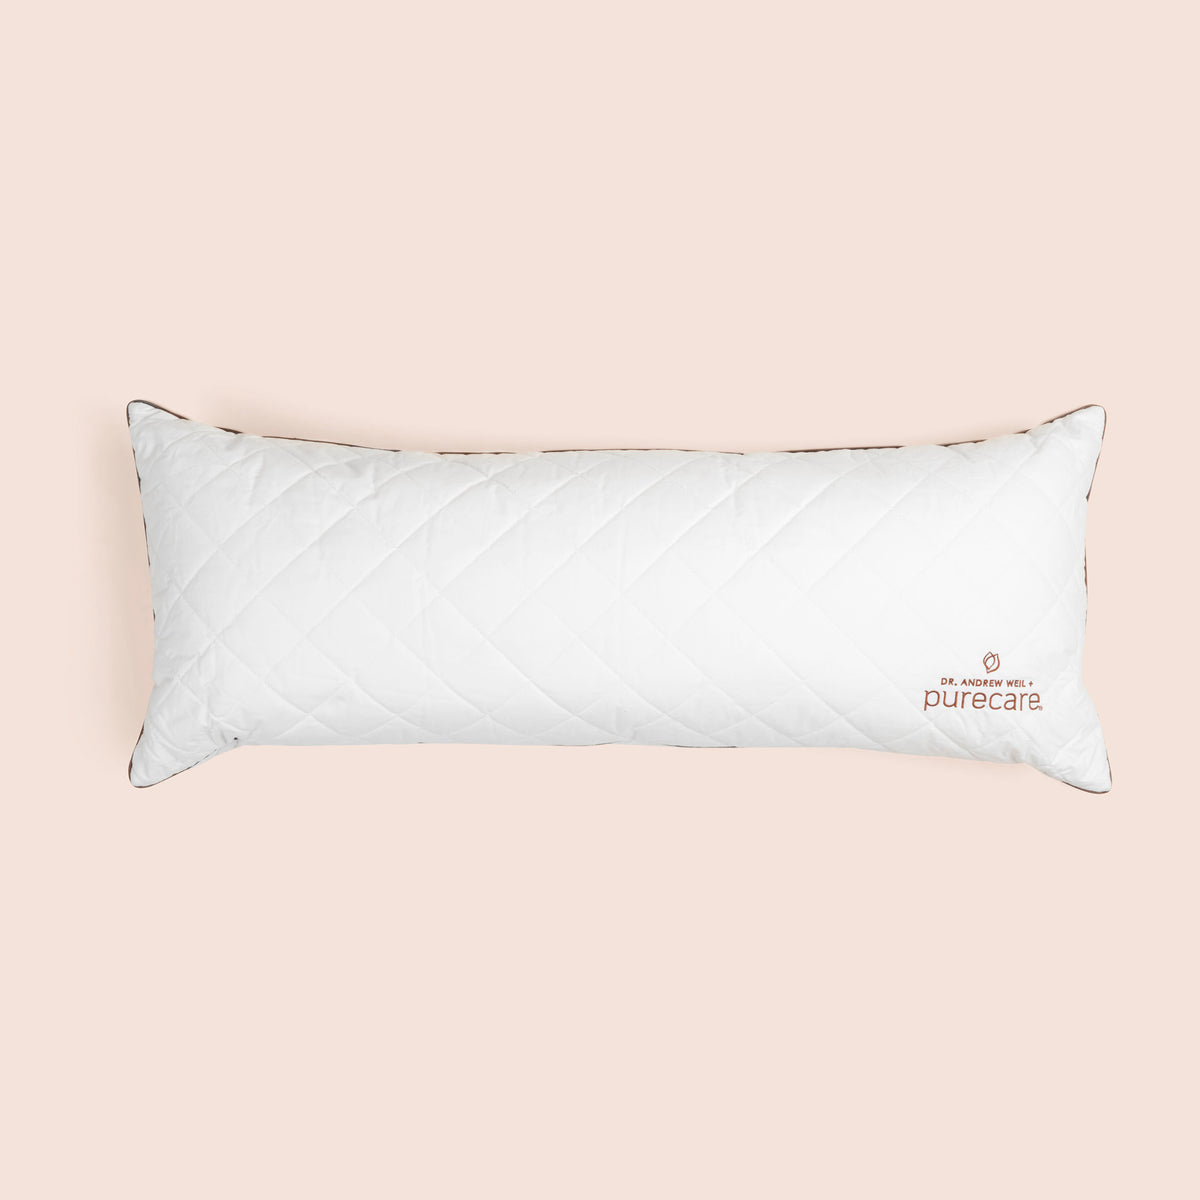 Image of white Lumbar Pillow Insert on a light pink background 